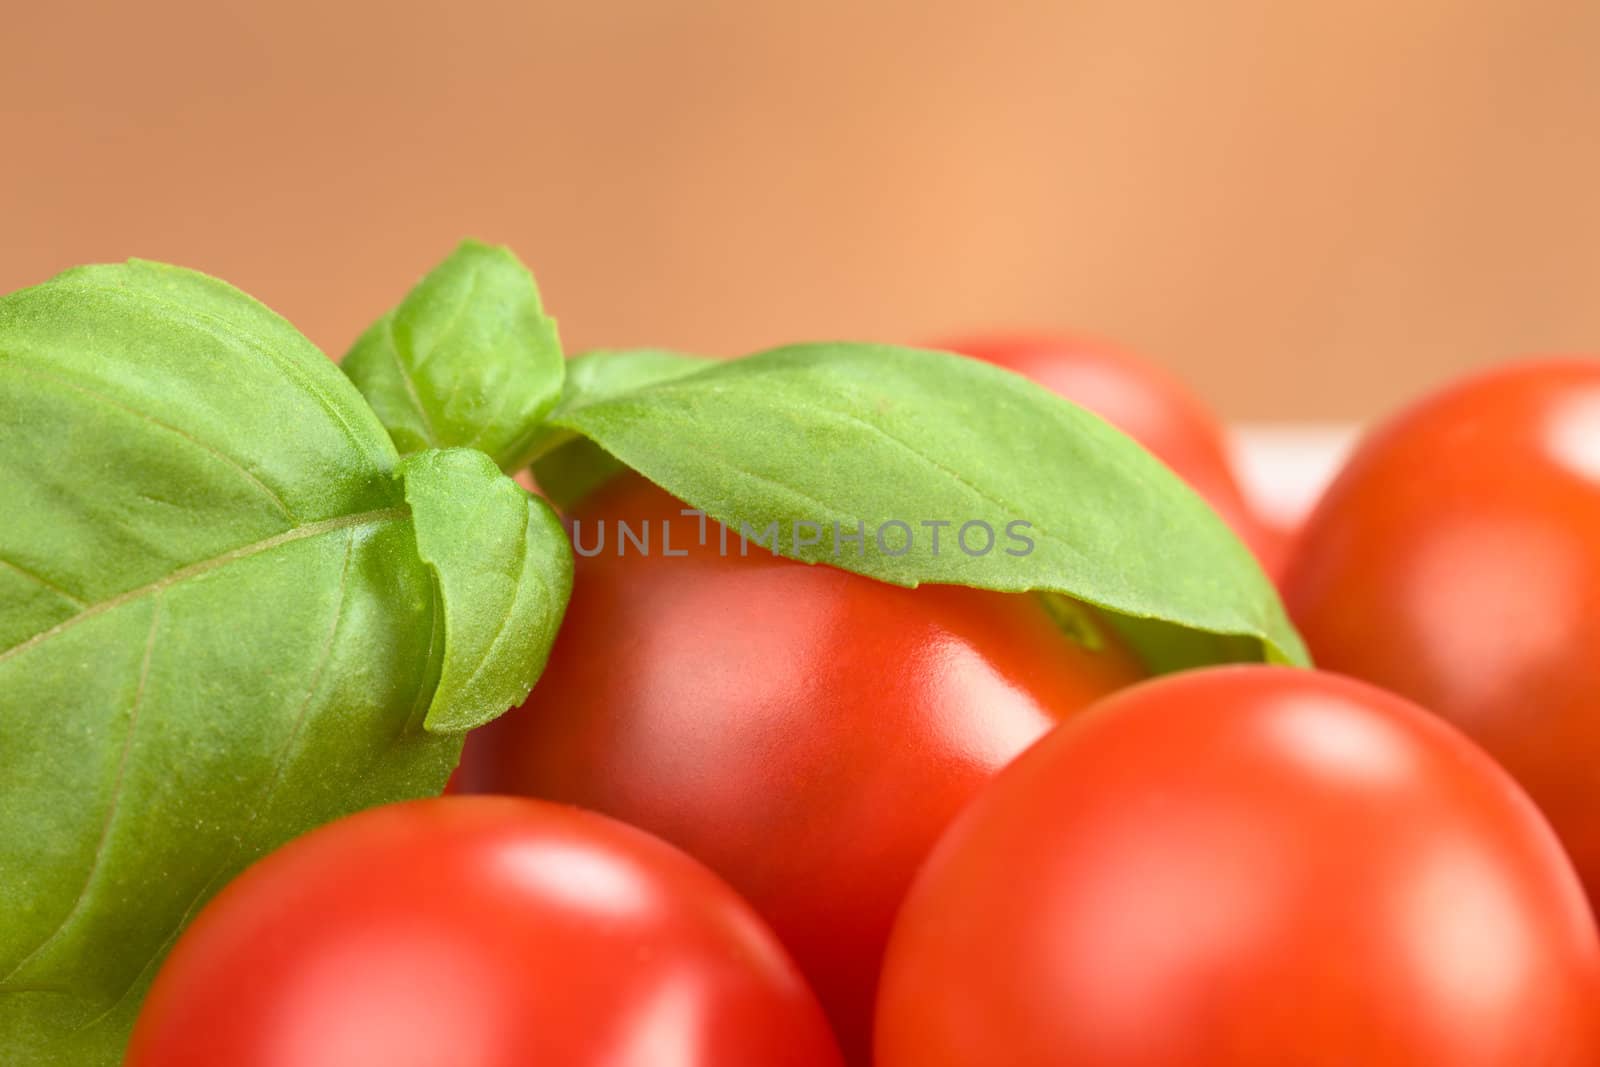 Basil leaf on cherry tomatoes (Very Shallow Depth of Field, Focus on the front of the basil leaf on the right) 